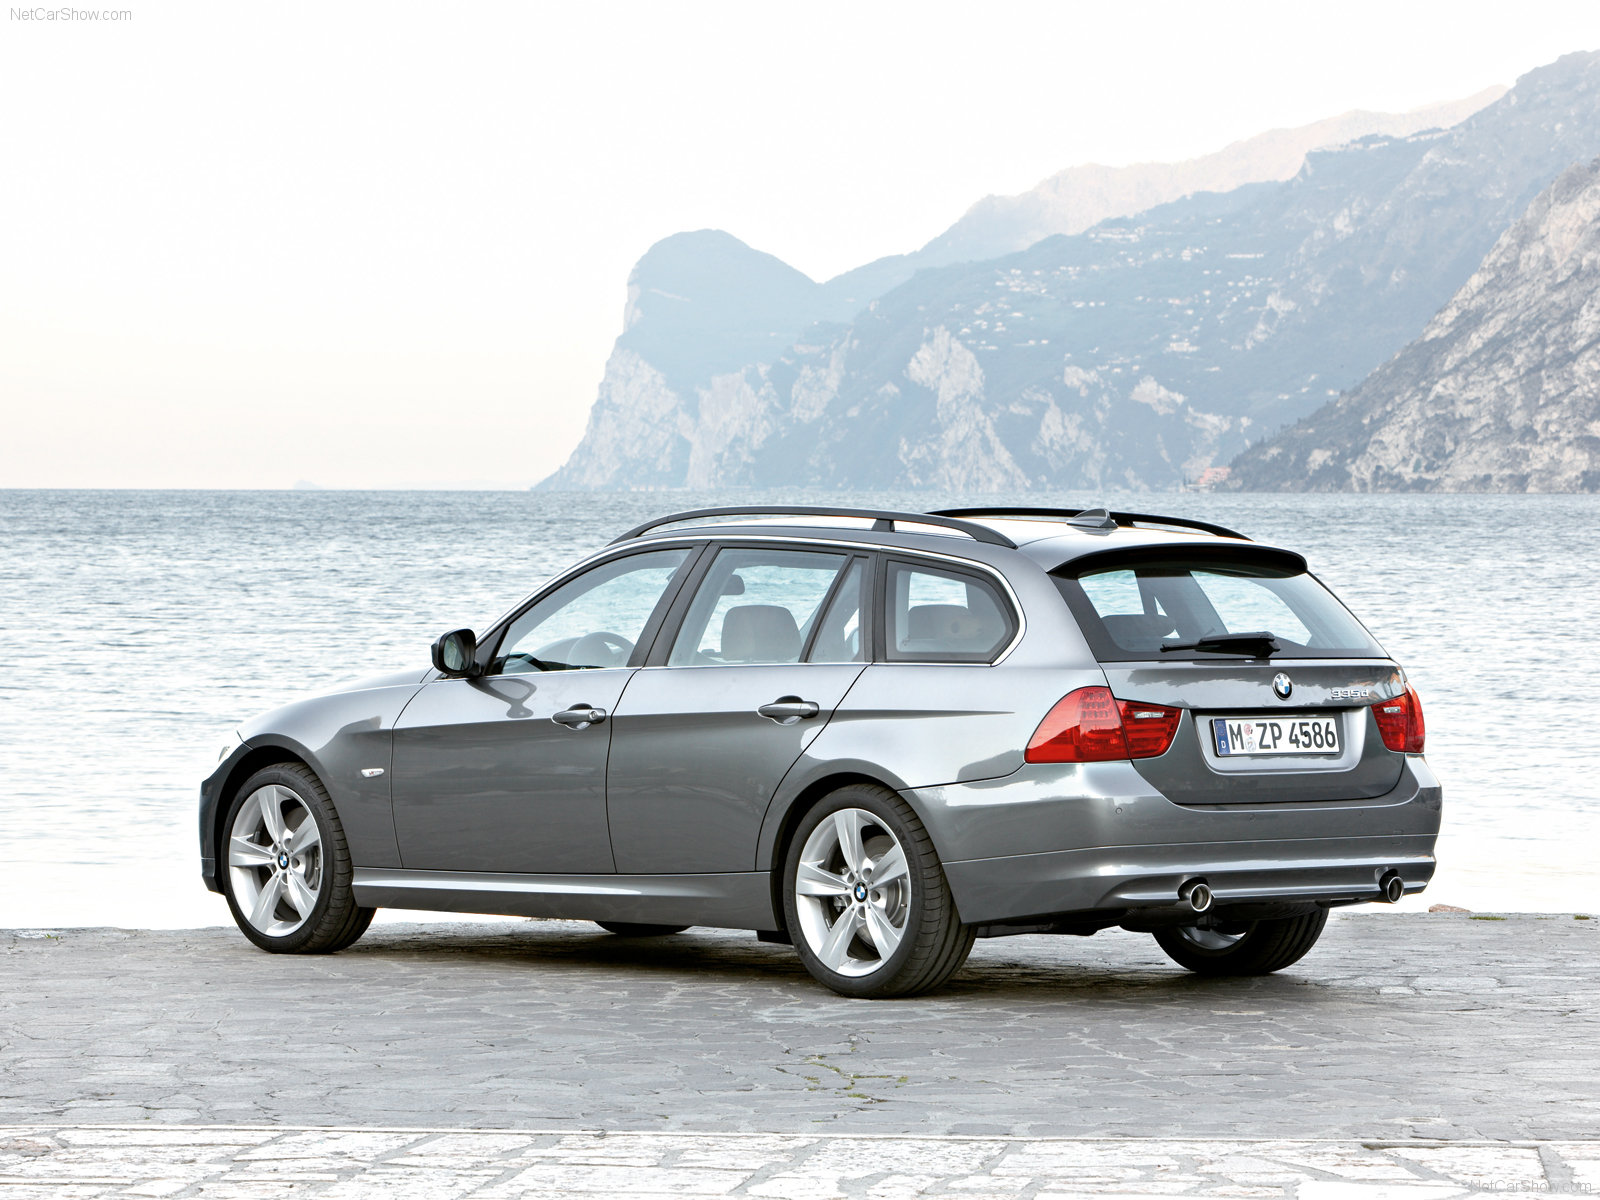 Series on Bmw 3 Series E91 Touring Photo Pic Wallpaper High Quality